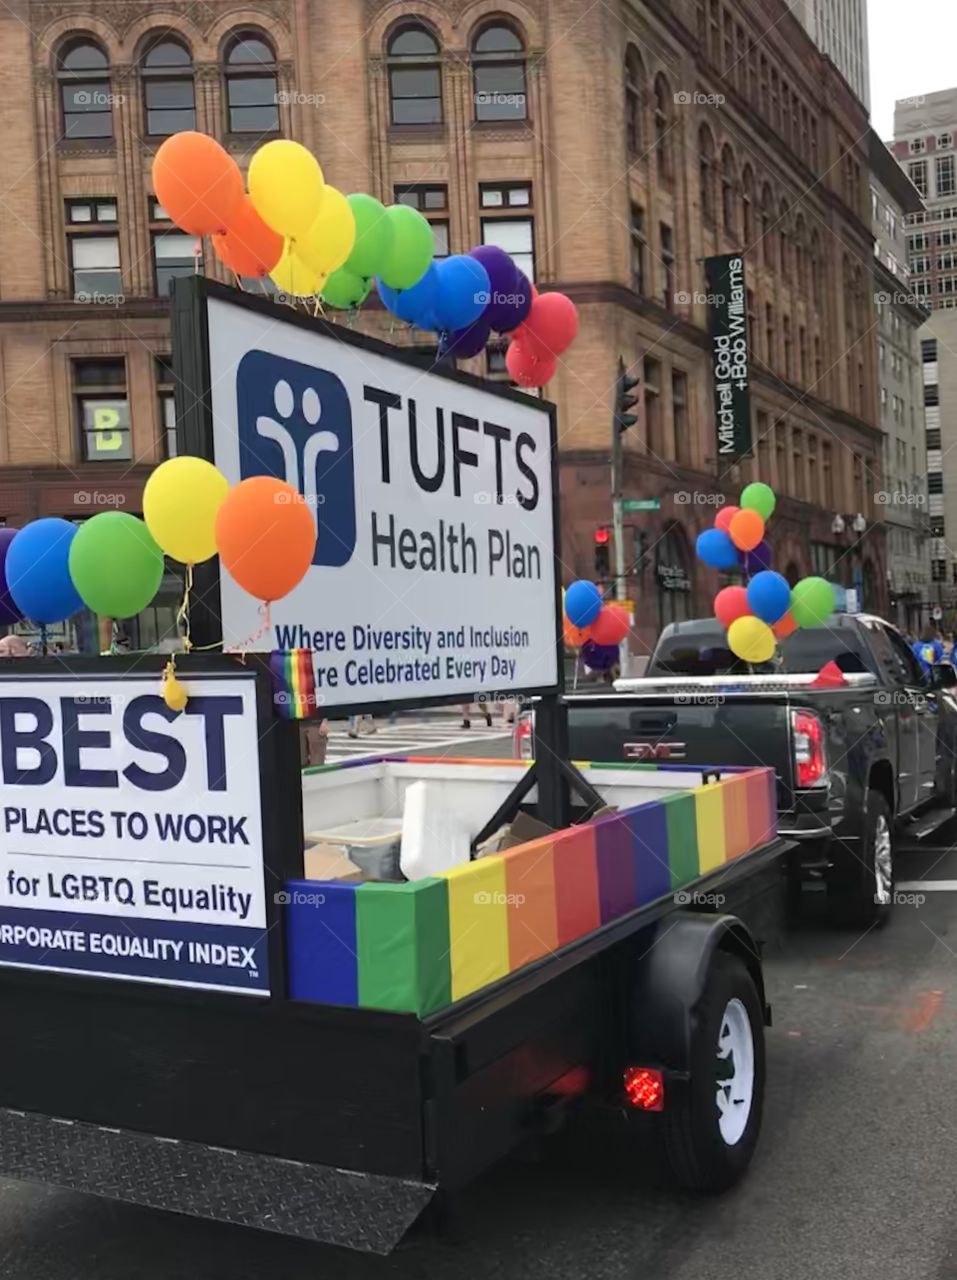 Tufts Health Plan float at the Boston Pride Parade